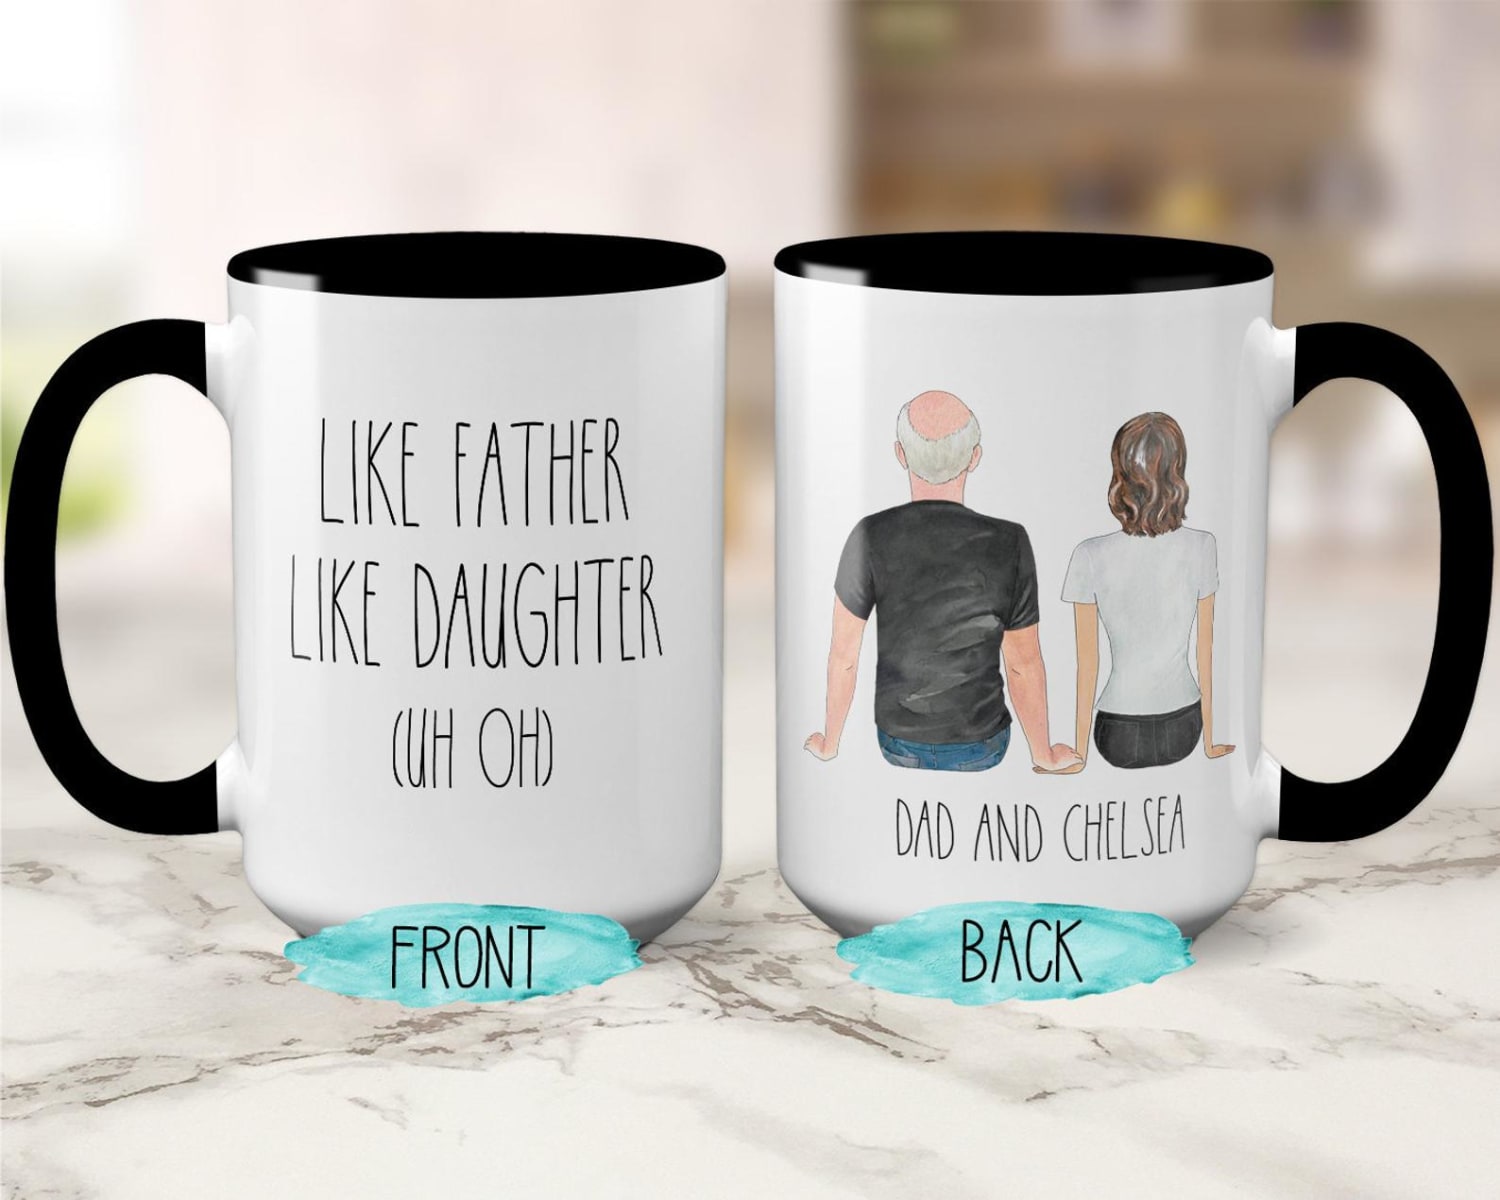 30 Funny Father's Day Gifts 2022 - Hilarious Gifts for Dad